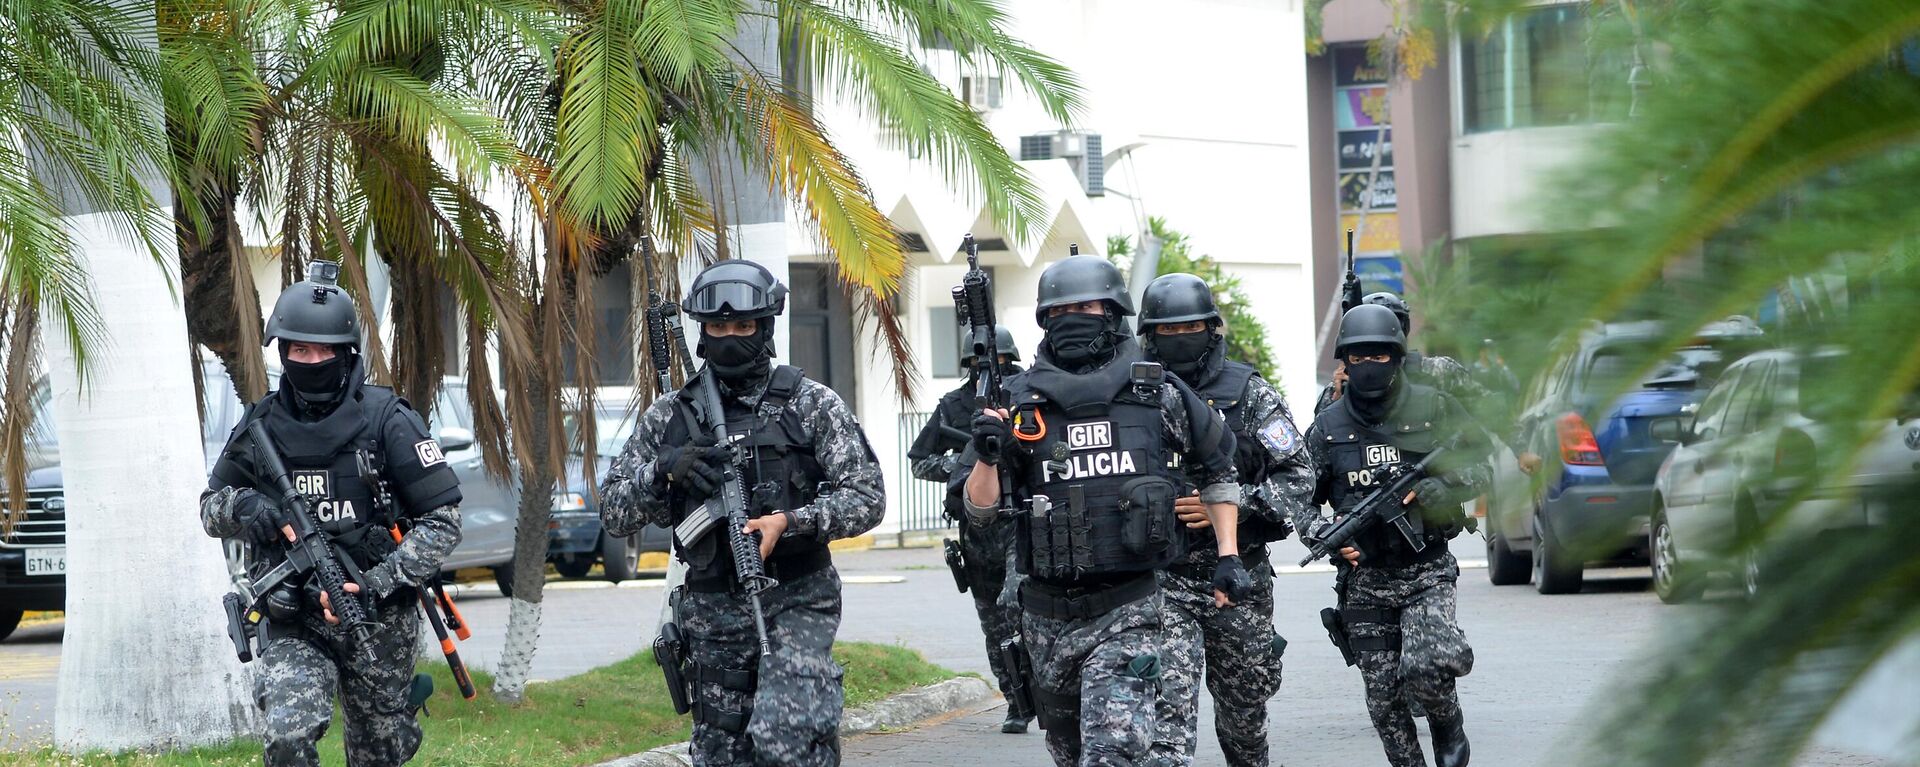 An Ecuadorean police squad enters the premises of Ecuador's TC television channel after unidentified gunmen burst into the state-owned television studio live on air on January 9, 2024, in Guayaquil, Ecuador, a day after Ecuadorean President Daniel Noboa declared a state of emergency following the escape from prison of a dangerous narco boss. - Sputnik Africa, 1920, 10.01.2024